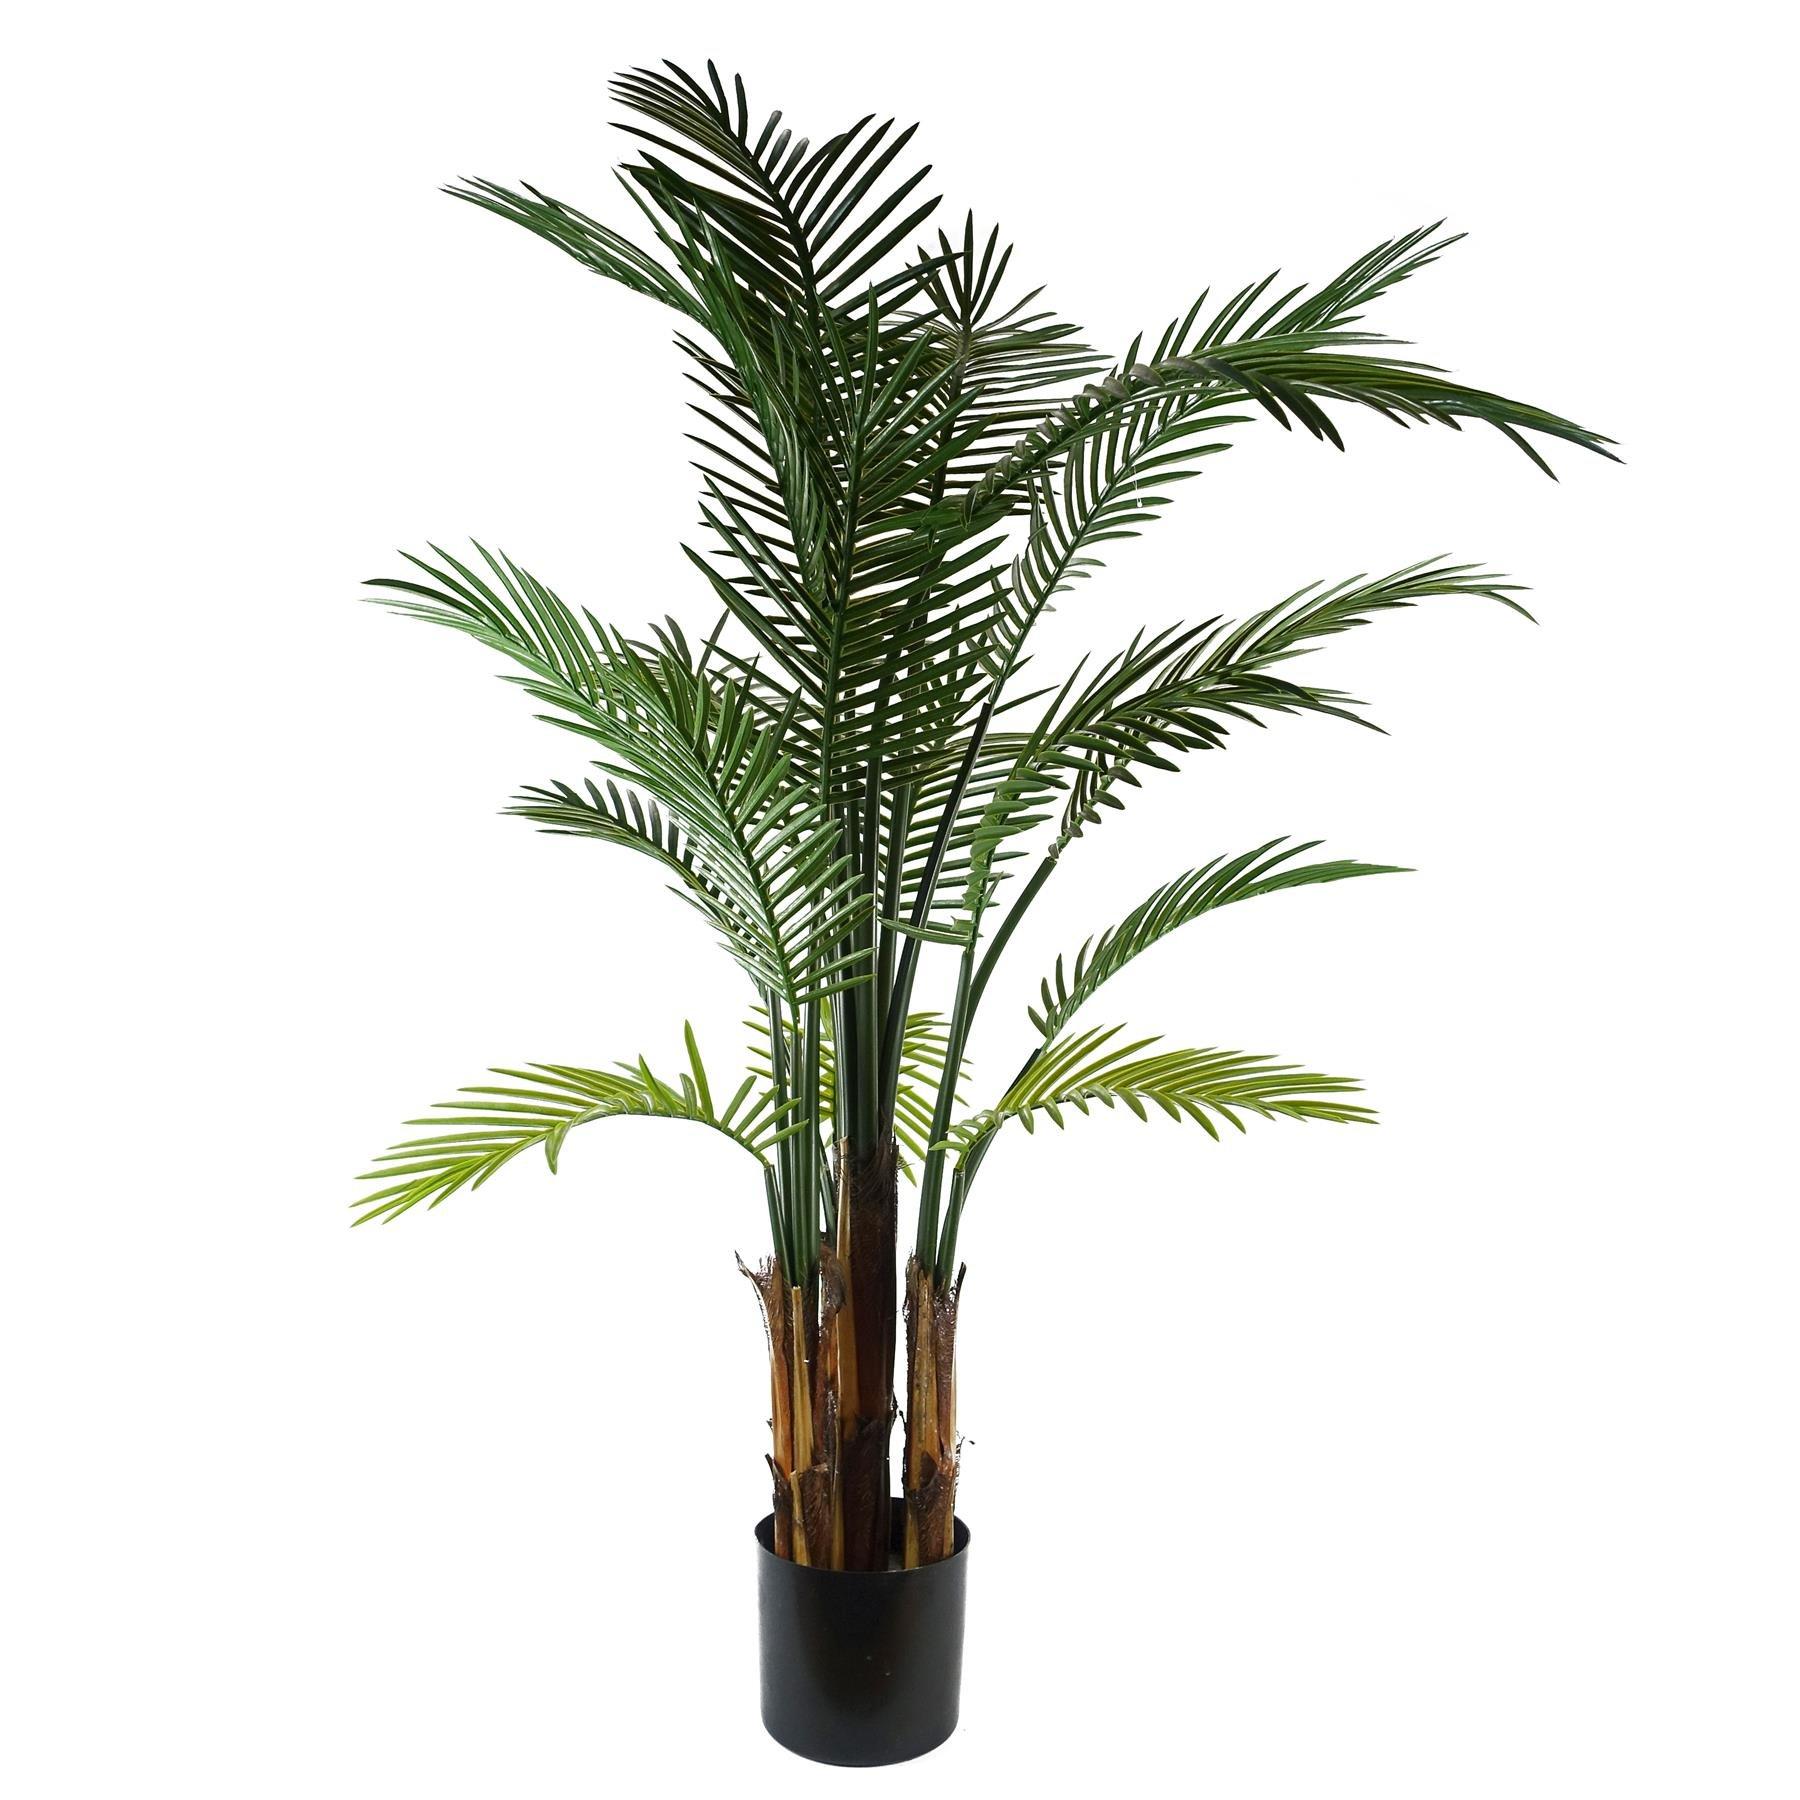 125cm UV Resistant Raphis Palm Tree with Natural Trunk